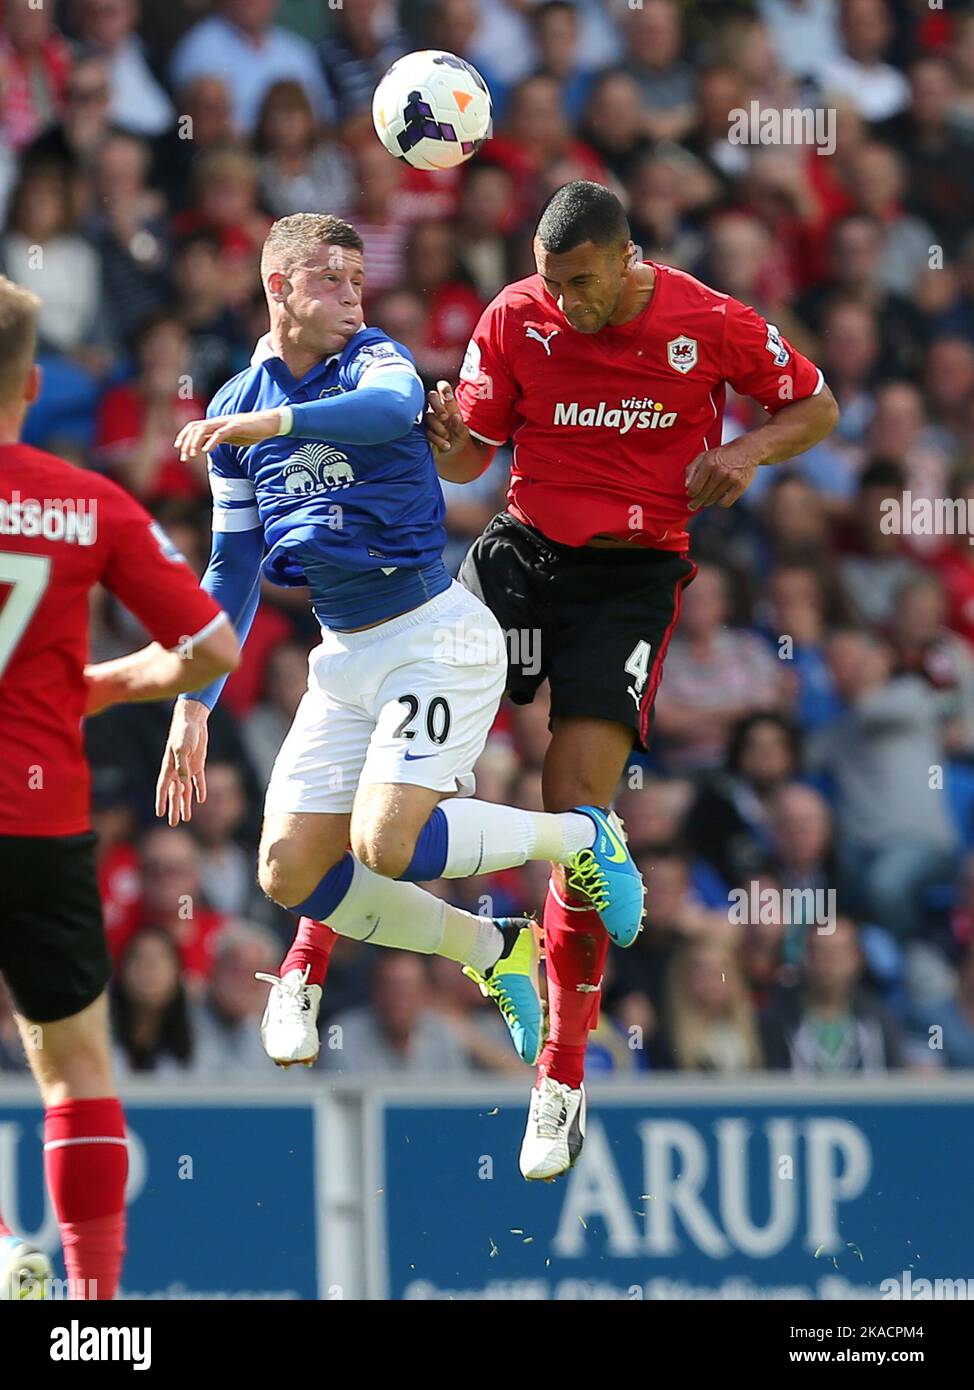 31st August 2013- Barclays Premiership - Cardiff City Vs Everton - Ross Barkley of Everton and Steven Caulker of Cardiff City challenge for a header - Photo: Paul Roberts/Pathos. Stock Photo